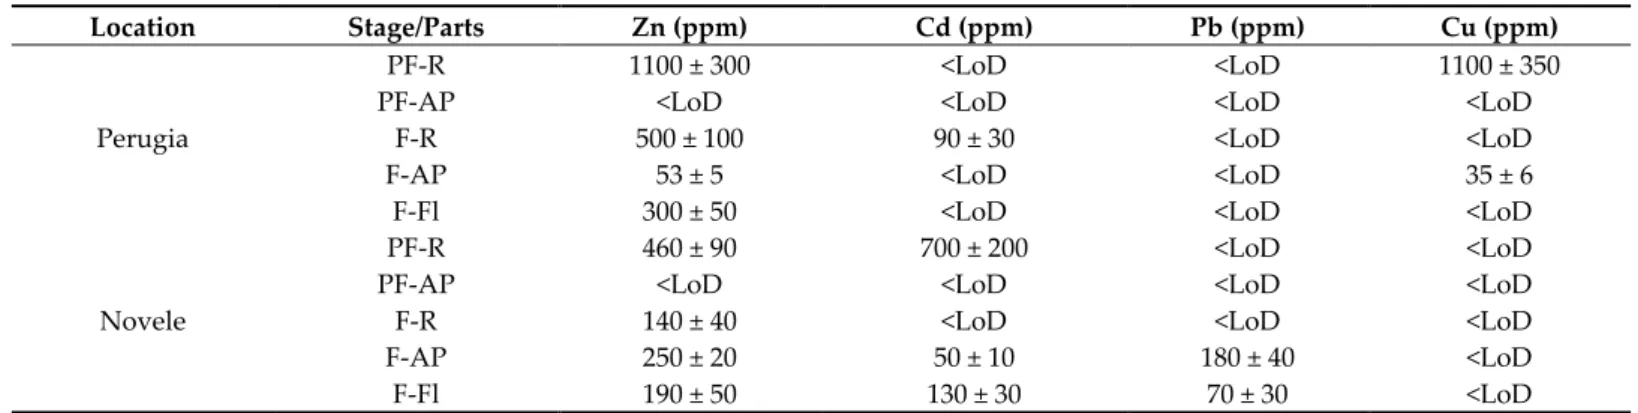 Table 4. Heavy metals (Zn, Cd, Pb and Cu) content of different parts of A. lutea collected from three different locations in Italy *